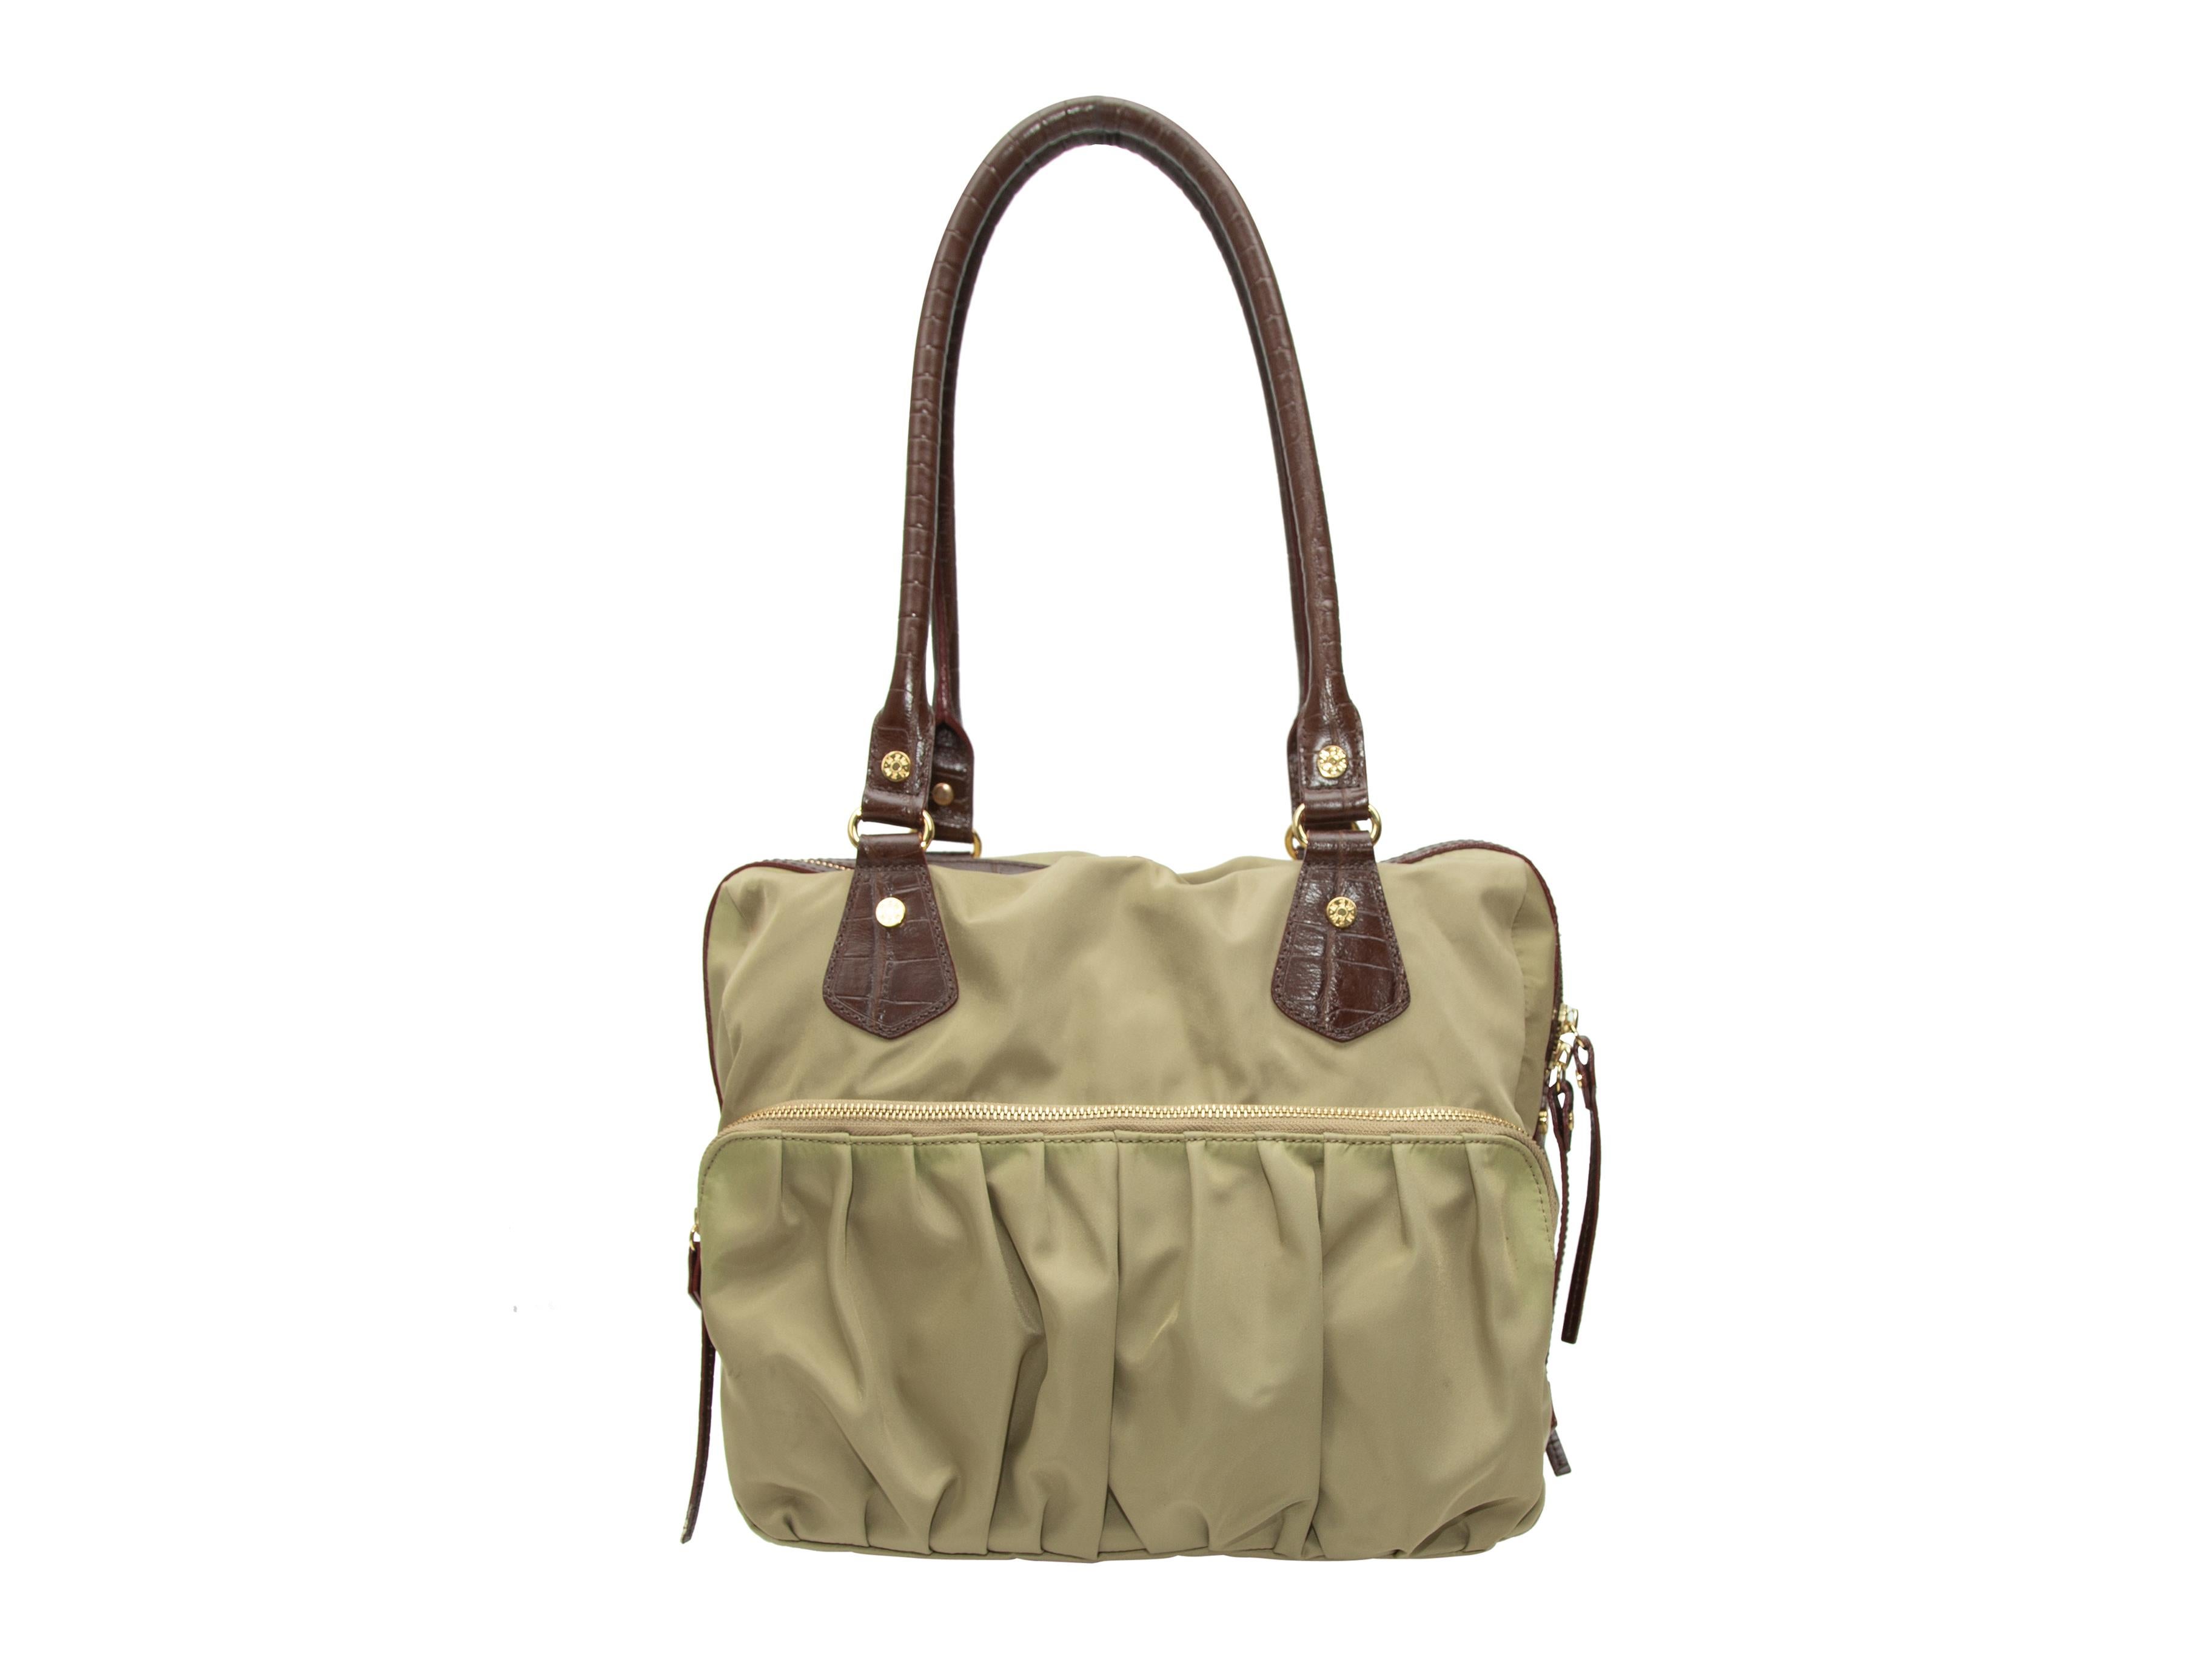 Product details: Khaki nylon tote bag by MZ Wallace. Brown leather trim throughout. Dual zip closure pockets at front. Dual rolled top handles. Zip closure at top. 12